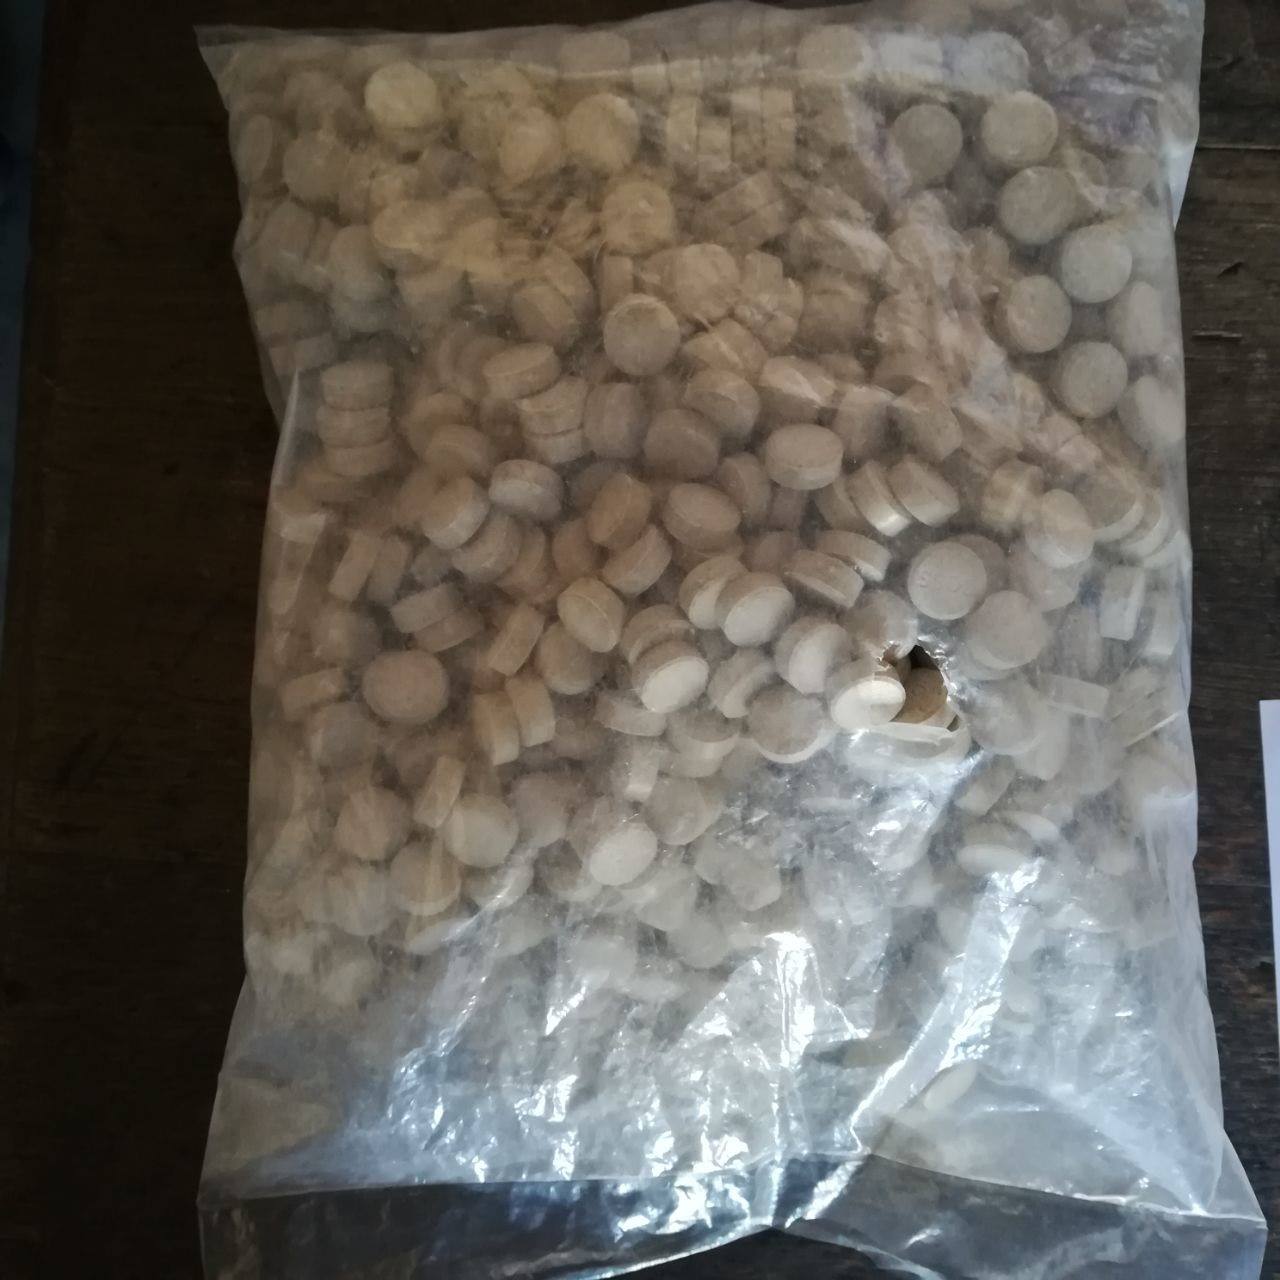 Three suspects arrested with the possession mandrax tablets valued at R 50 000